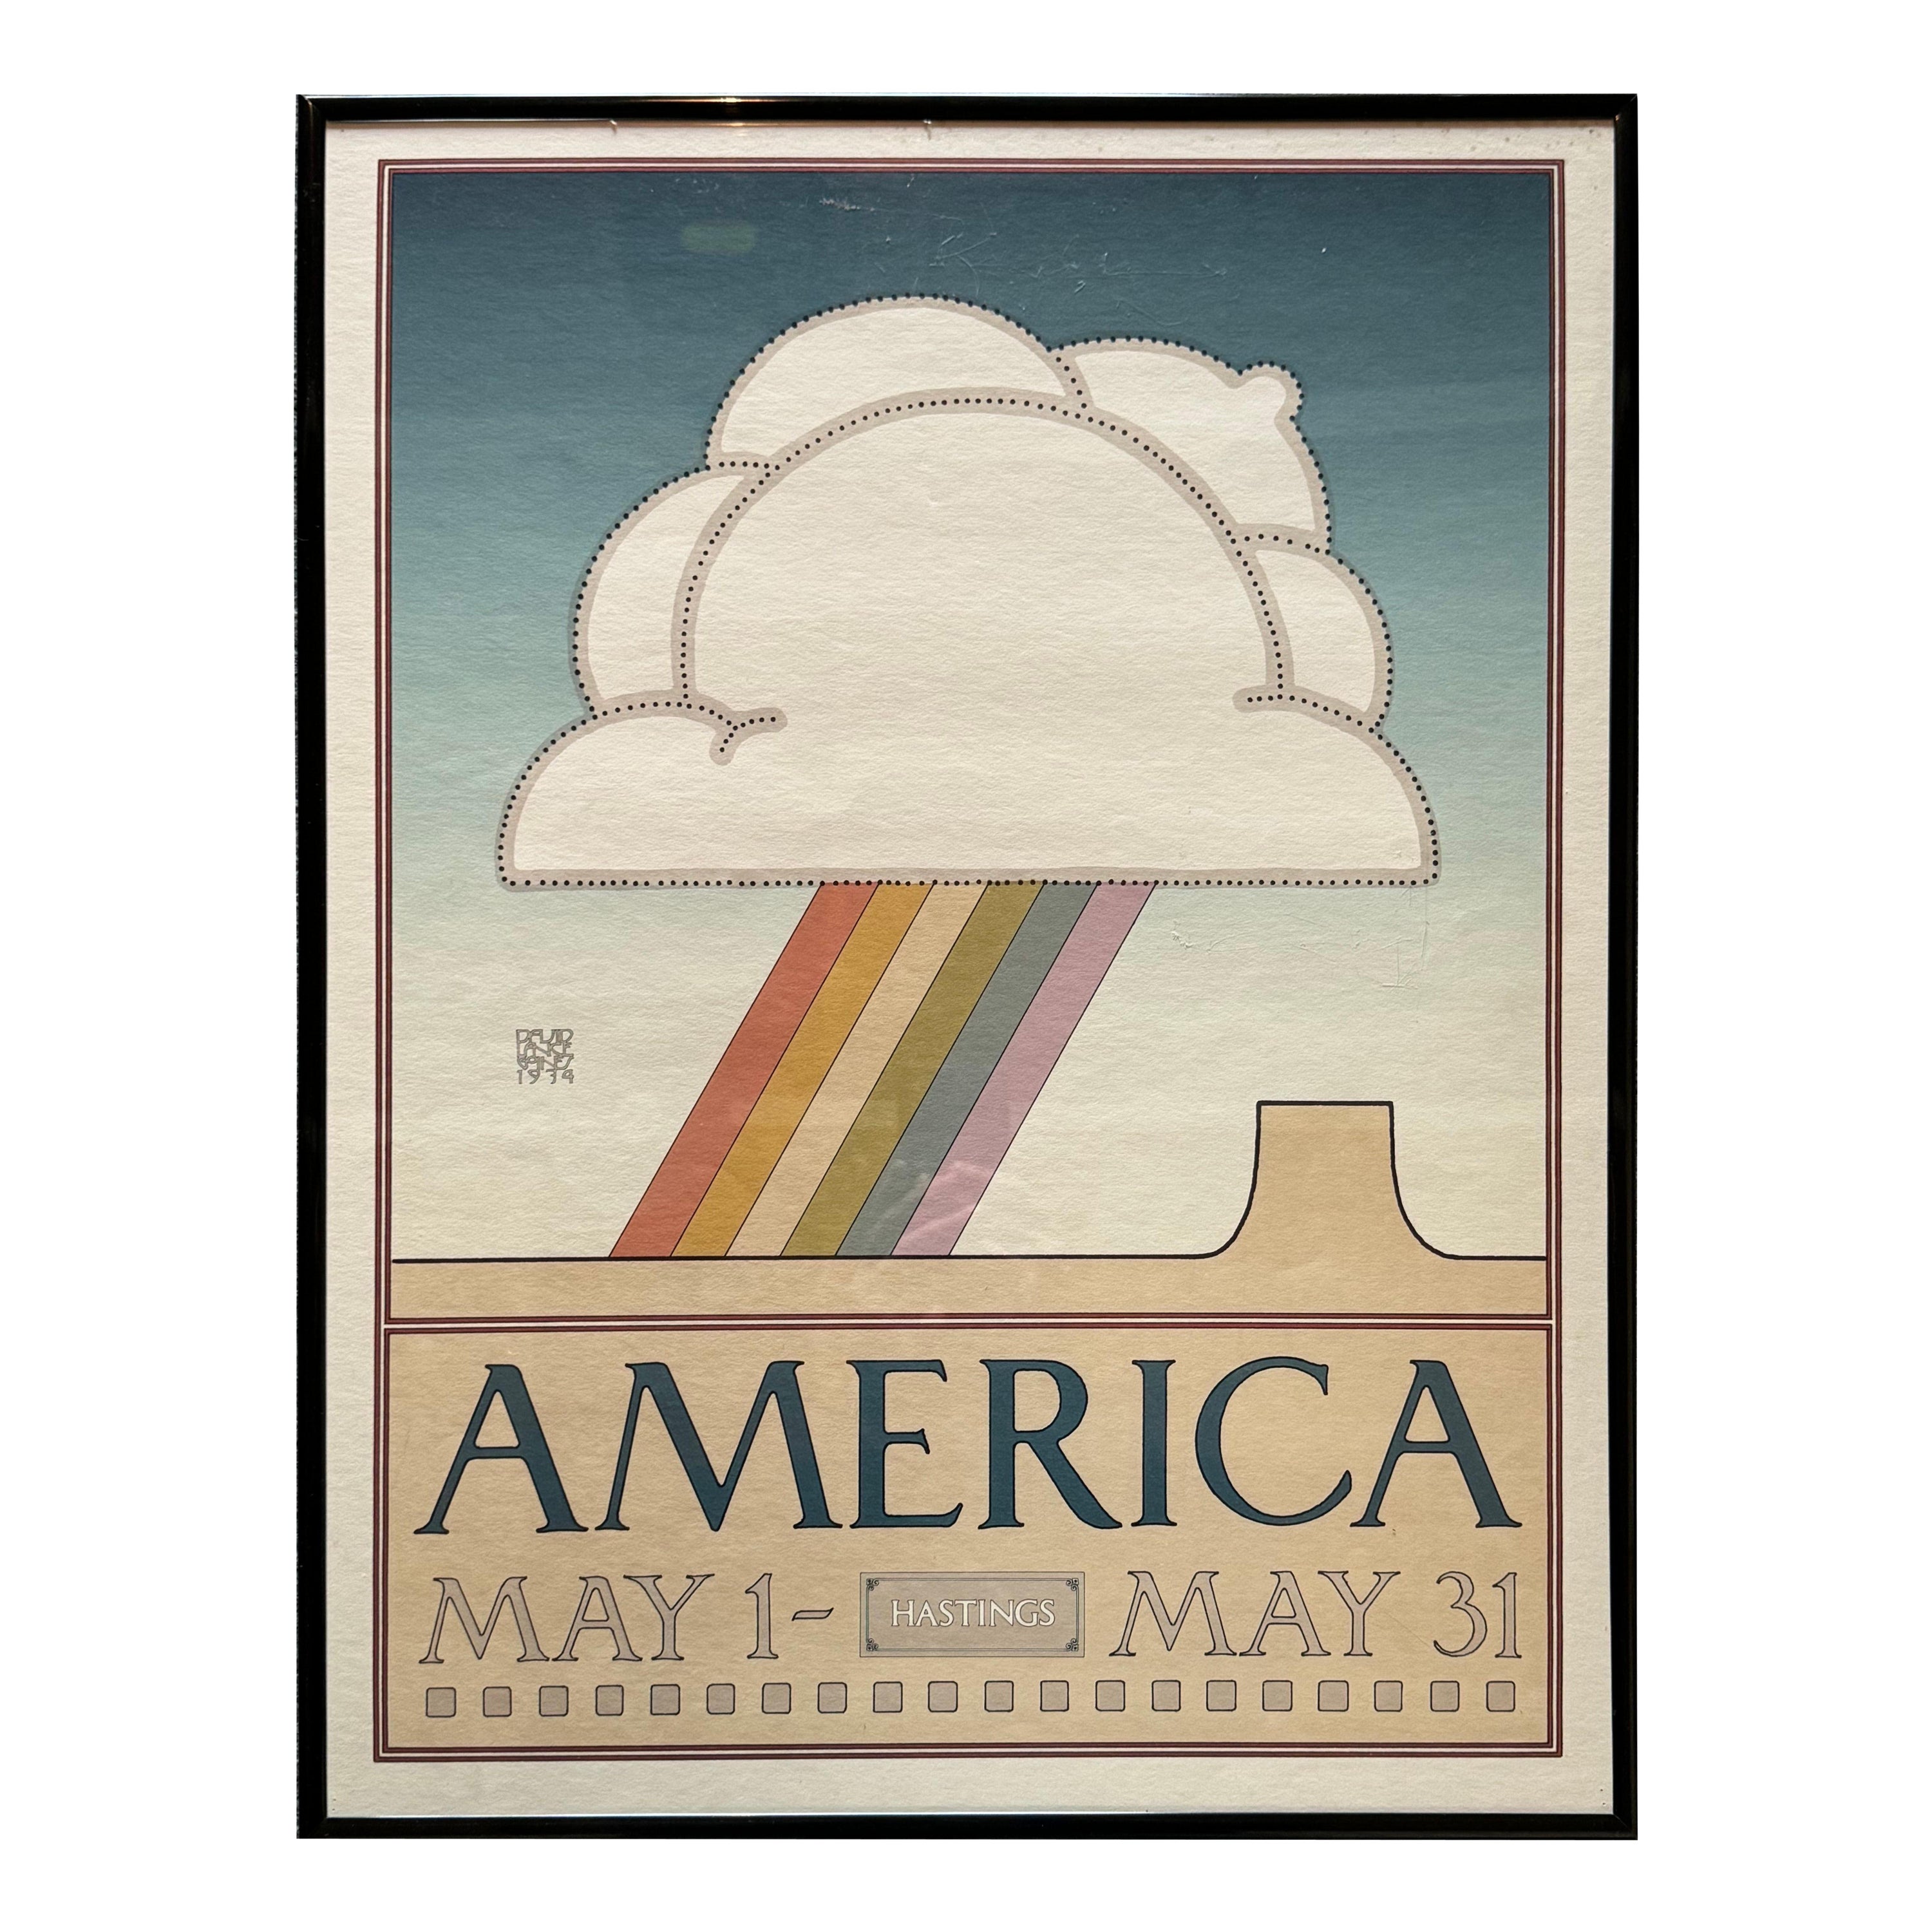 1974 David Lance Goines "America" For Hastings Clothing Store, San Francisco For Sale